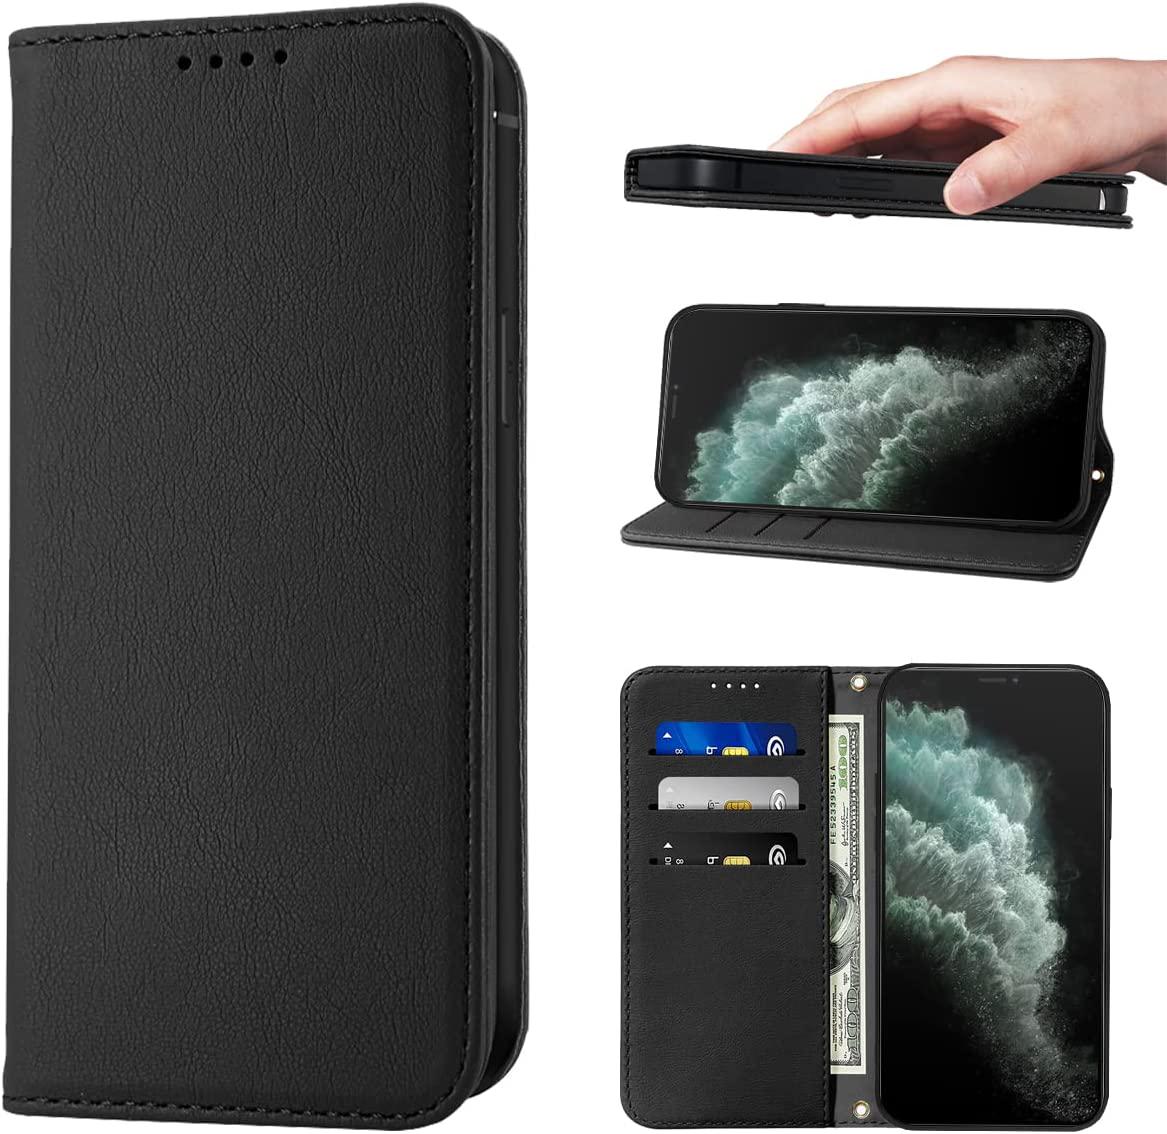 LANJLM, LANJLM Wallet Case for iPhone 11 Phone Cases Premium Leather PU Flip Cover Magnetic Shockproof Closure Book Design with Kickstand Feature and Card Slots iPhone 11 Case - Black